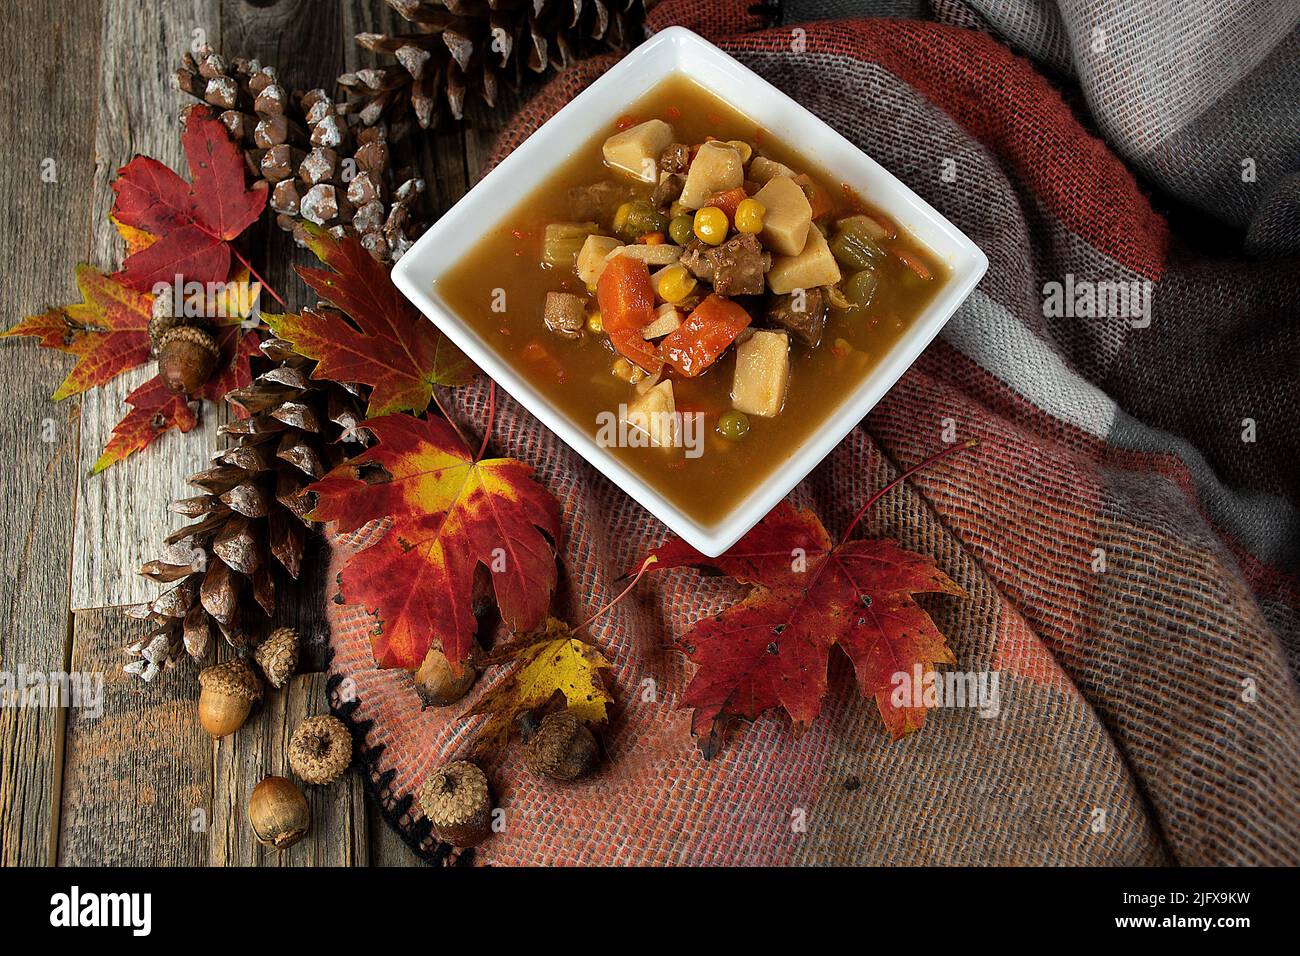 Beef vegetable soup in a square white bowl on a soft blanket with autumn leaves, pine cones, and acorns Stock Photo